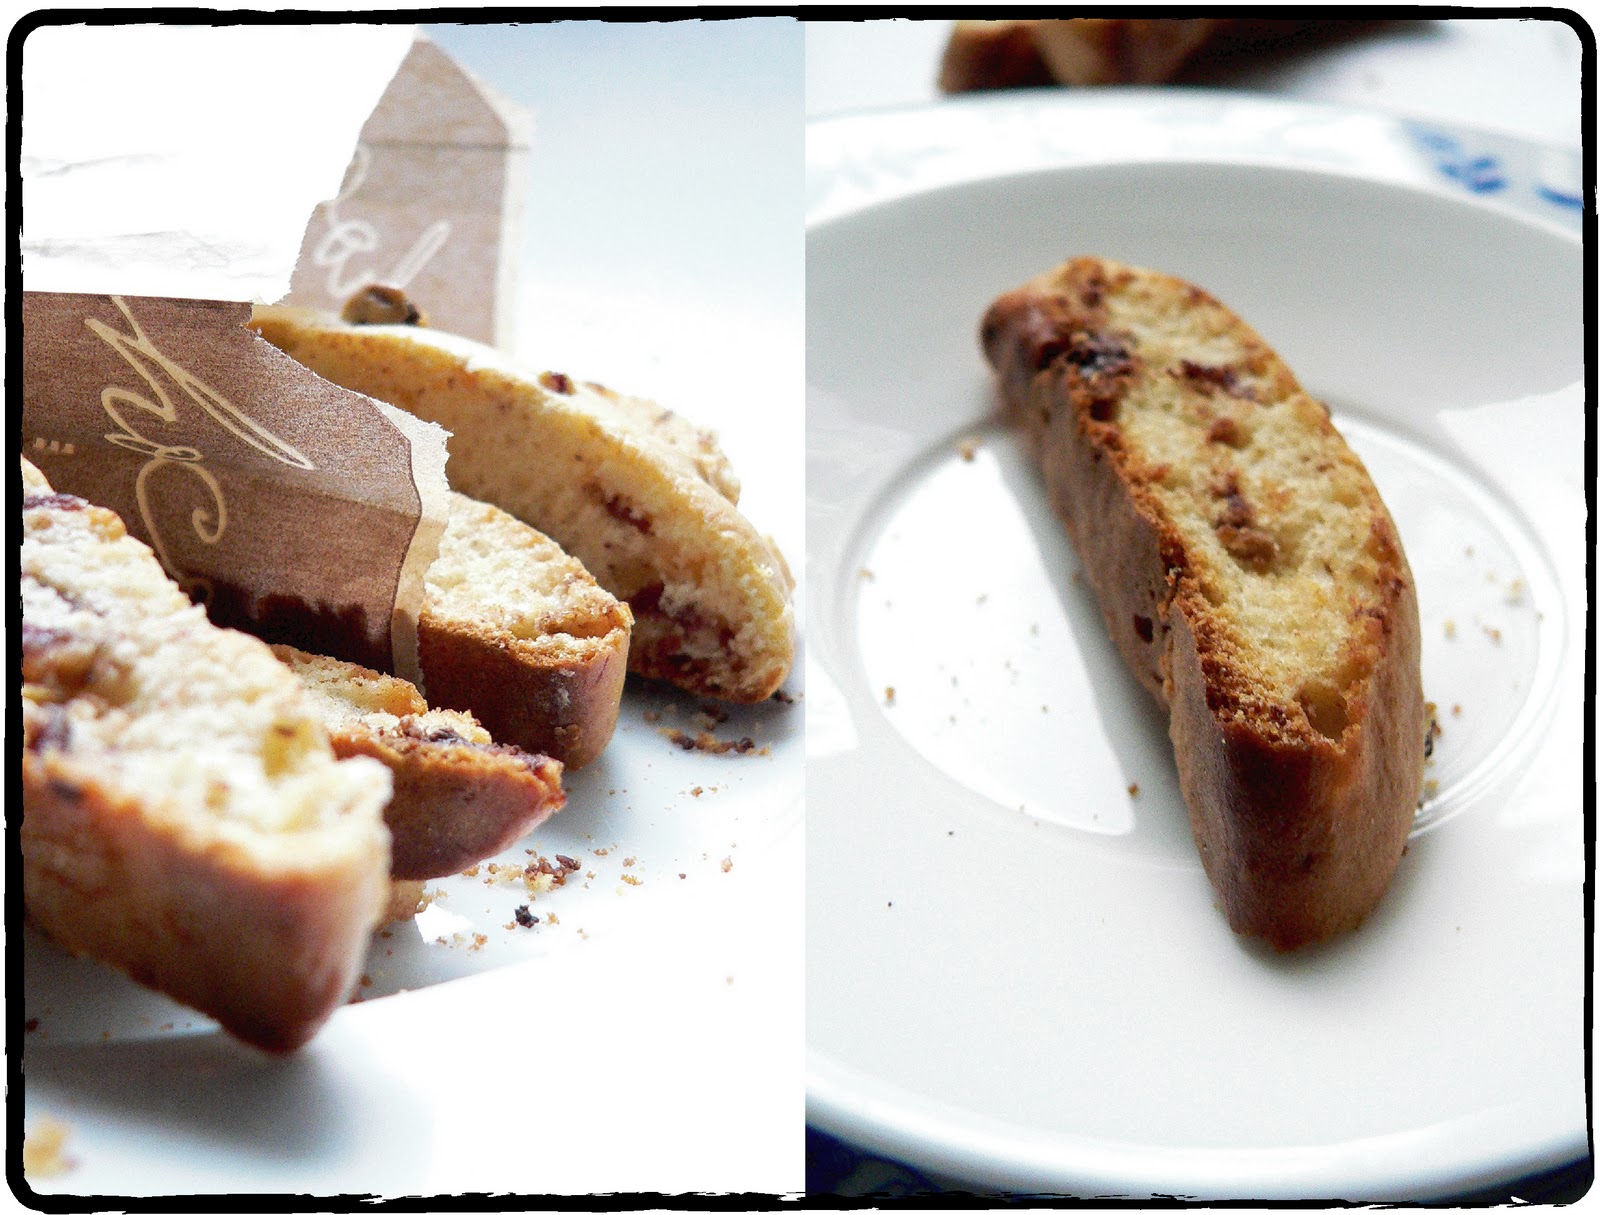 Cook is Good: SIMIL-CANTUCCINI AU CHOCOLAT, DATTES ET VANILLE